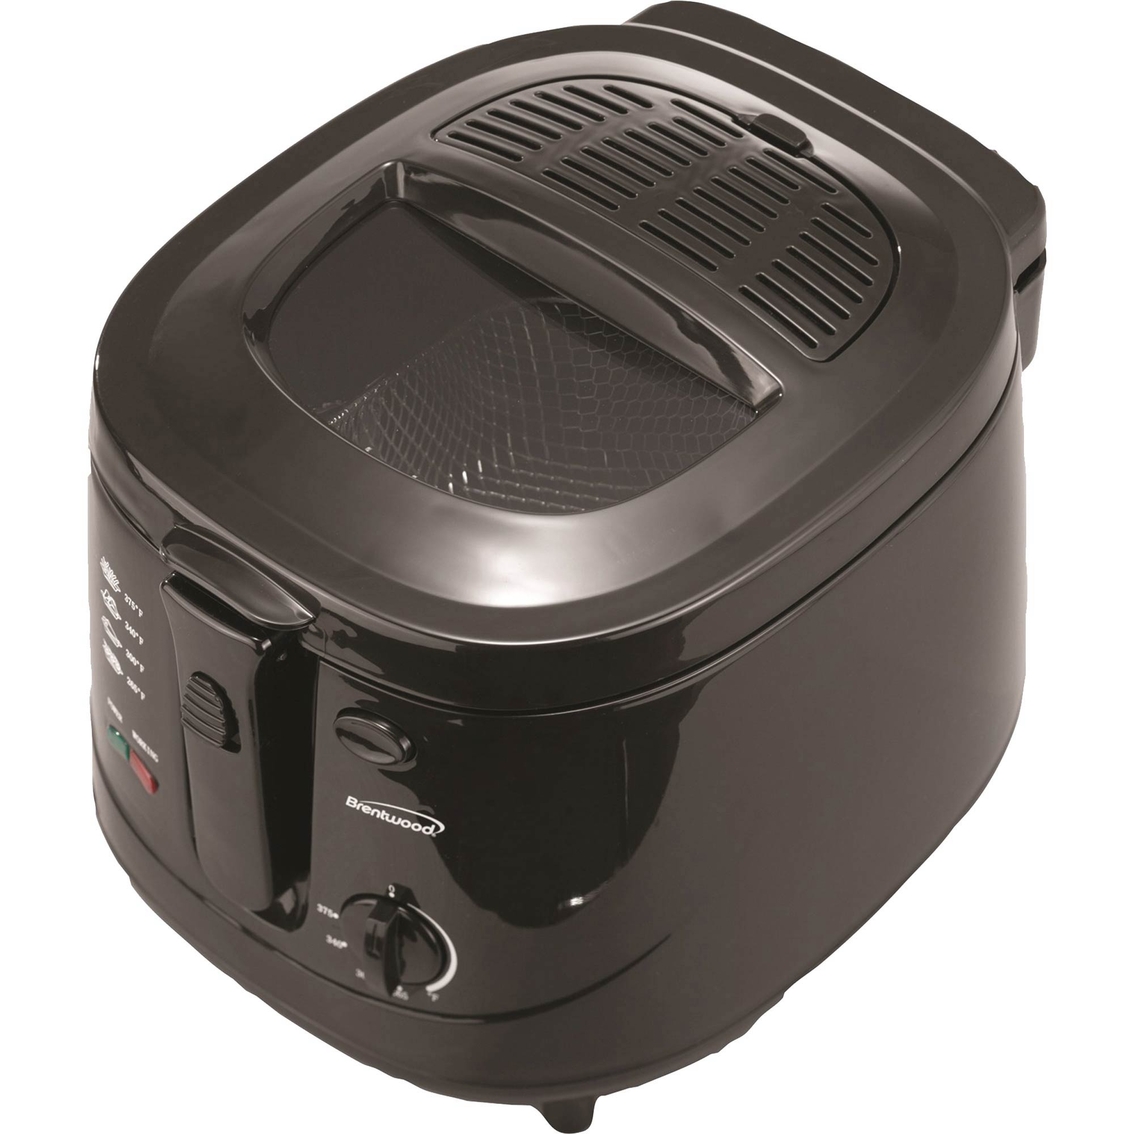 Brentwood 12 Cup Electric Deep Fryer - Image 5 of 9